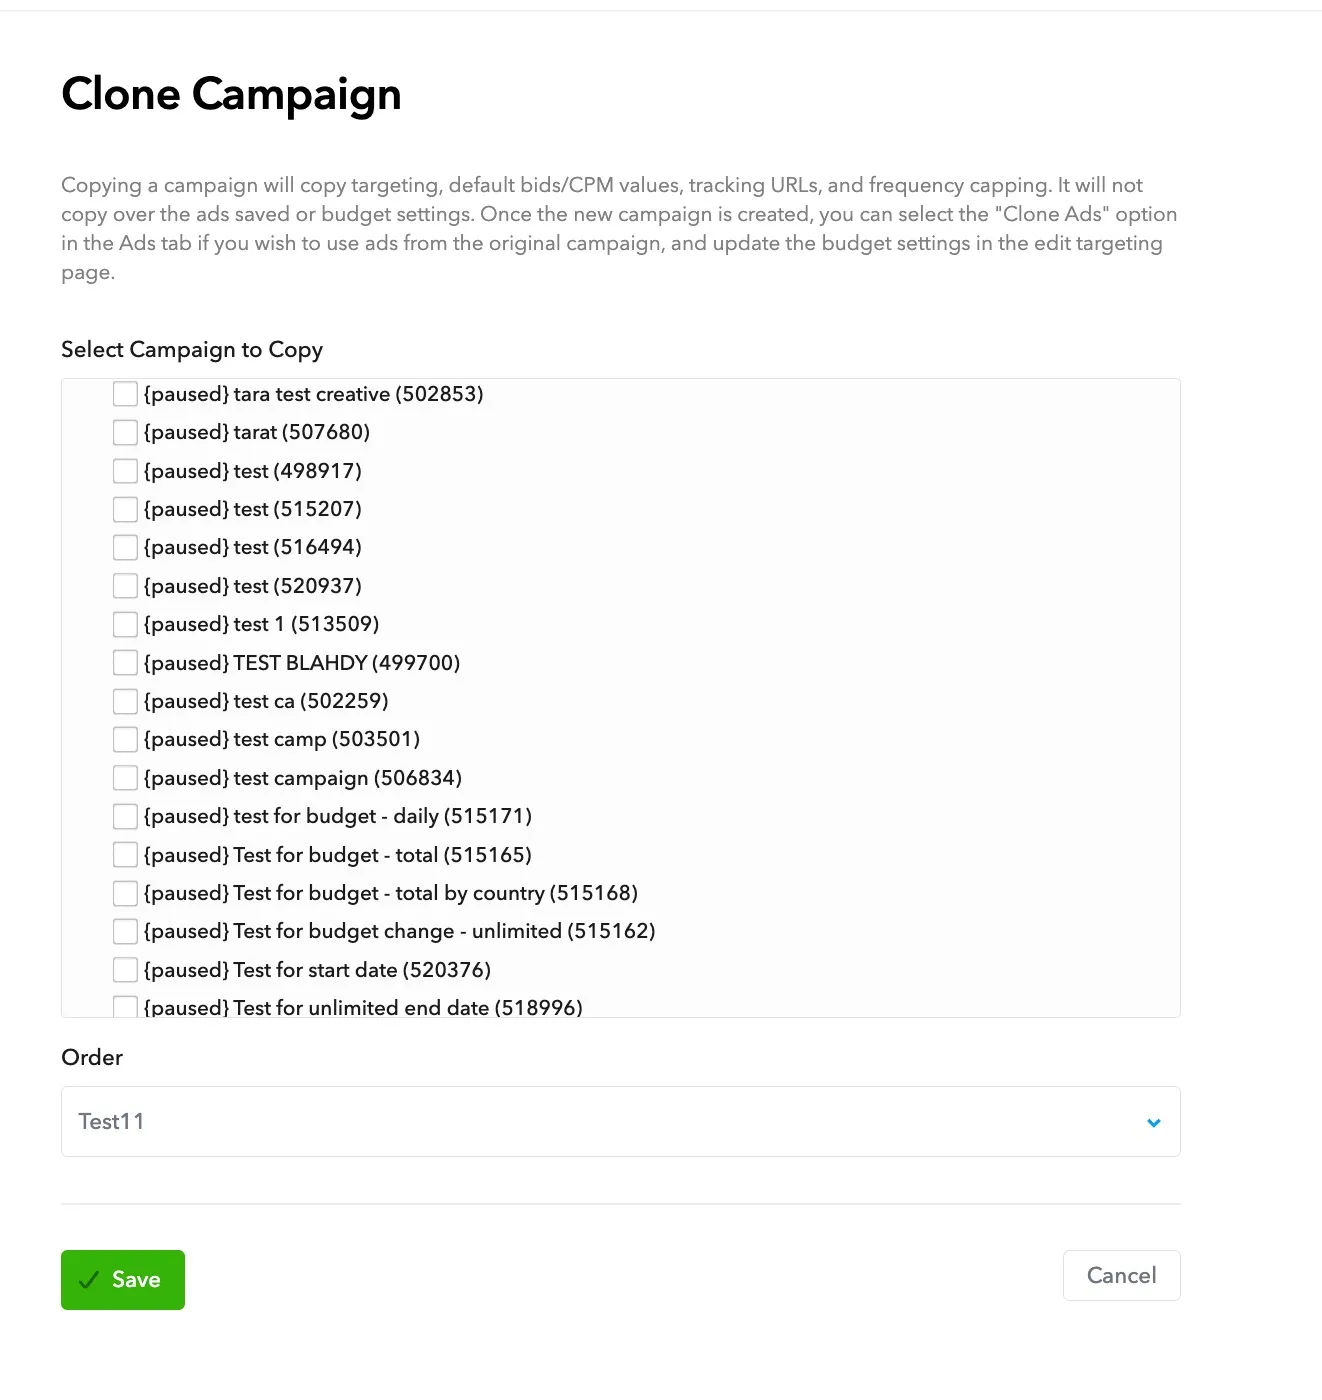 Clone Campaign. Copying a campaign will copy targeting, default bids/CPM values, tracking URLs, and frequency capping. It will not copy over the ads saved or budget settings. Once the new campaign is created, you can select the “Clone Ads” option in the Ads tab if you wish to use ads from the original campaign, and update the budget settings in the edit targeting page. Select a Campaign to Copy. Order. Save button. Cancel button.